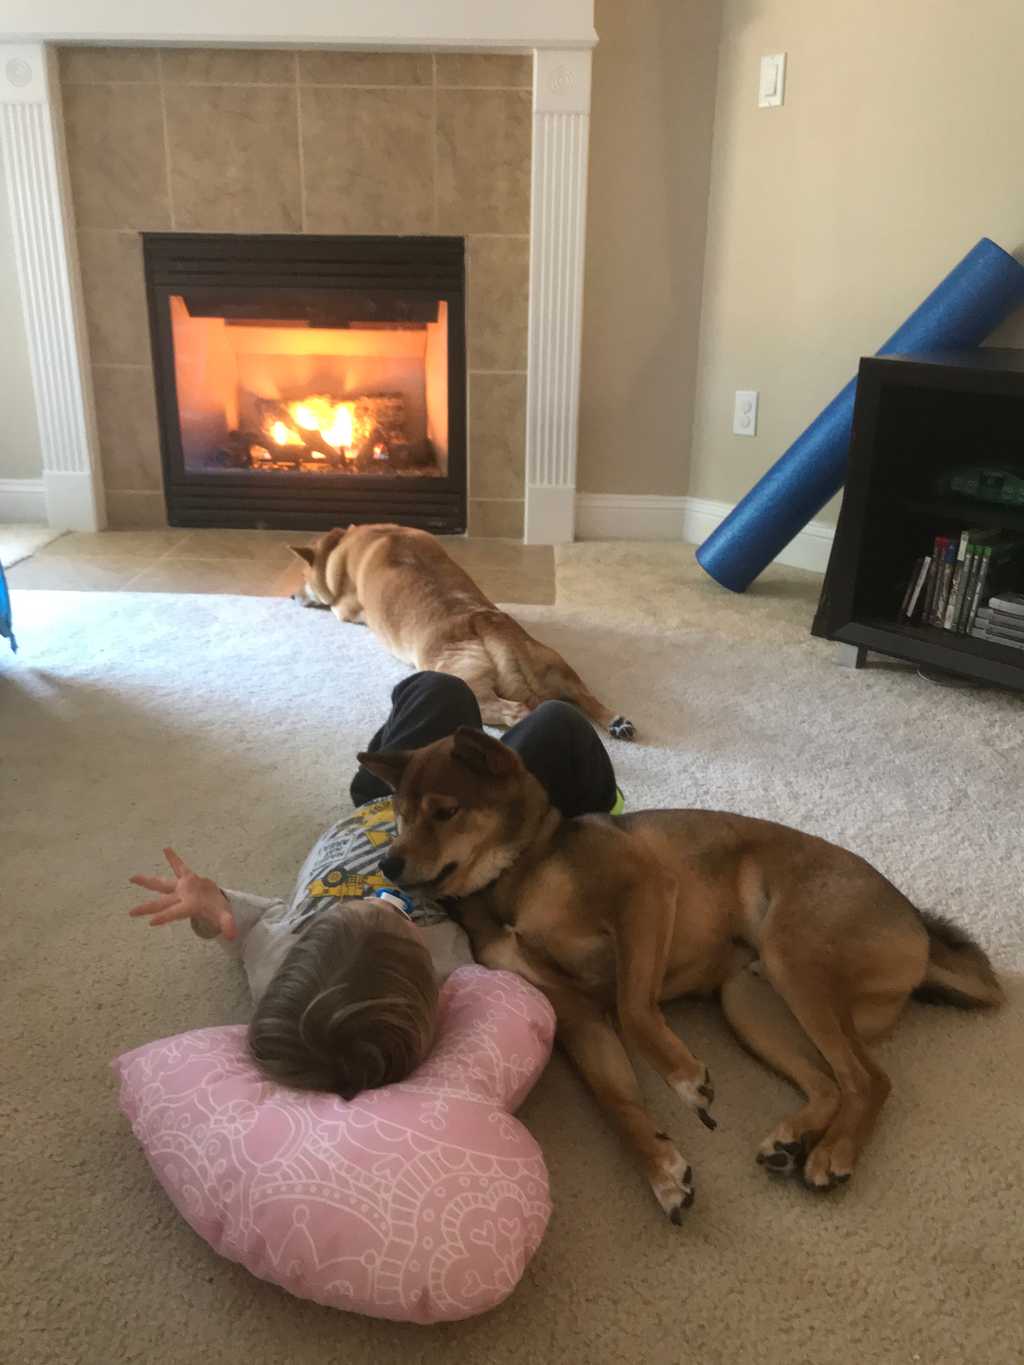 Puppies and Ash by the fire